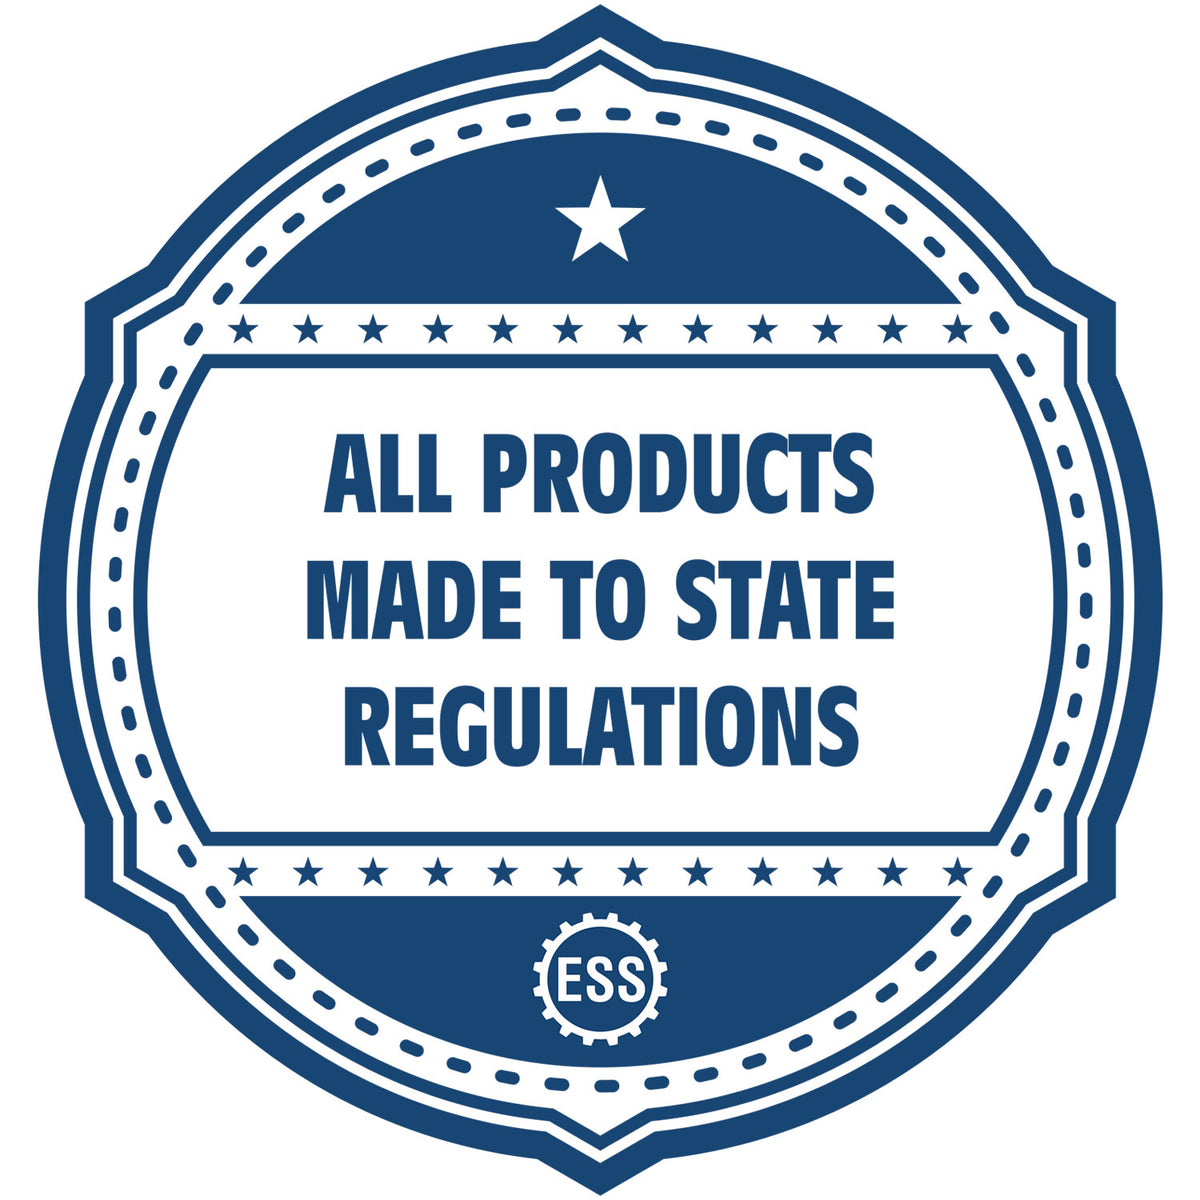 A blue icon or badge for the Hybrid Pennsylvania Landscape Architect Seal showing that this product is made in compliance with state regulations.